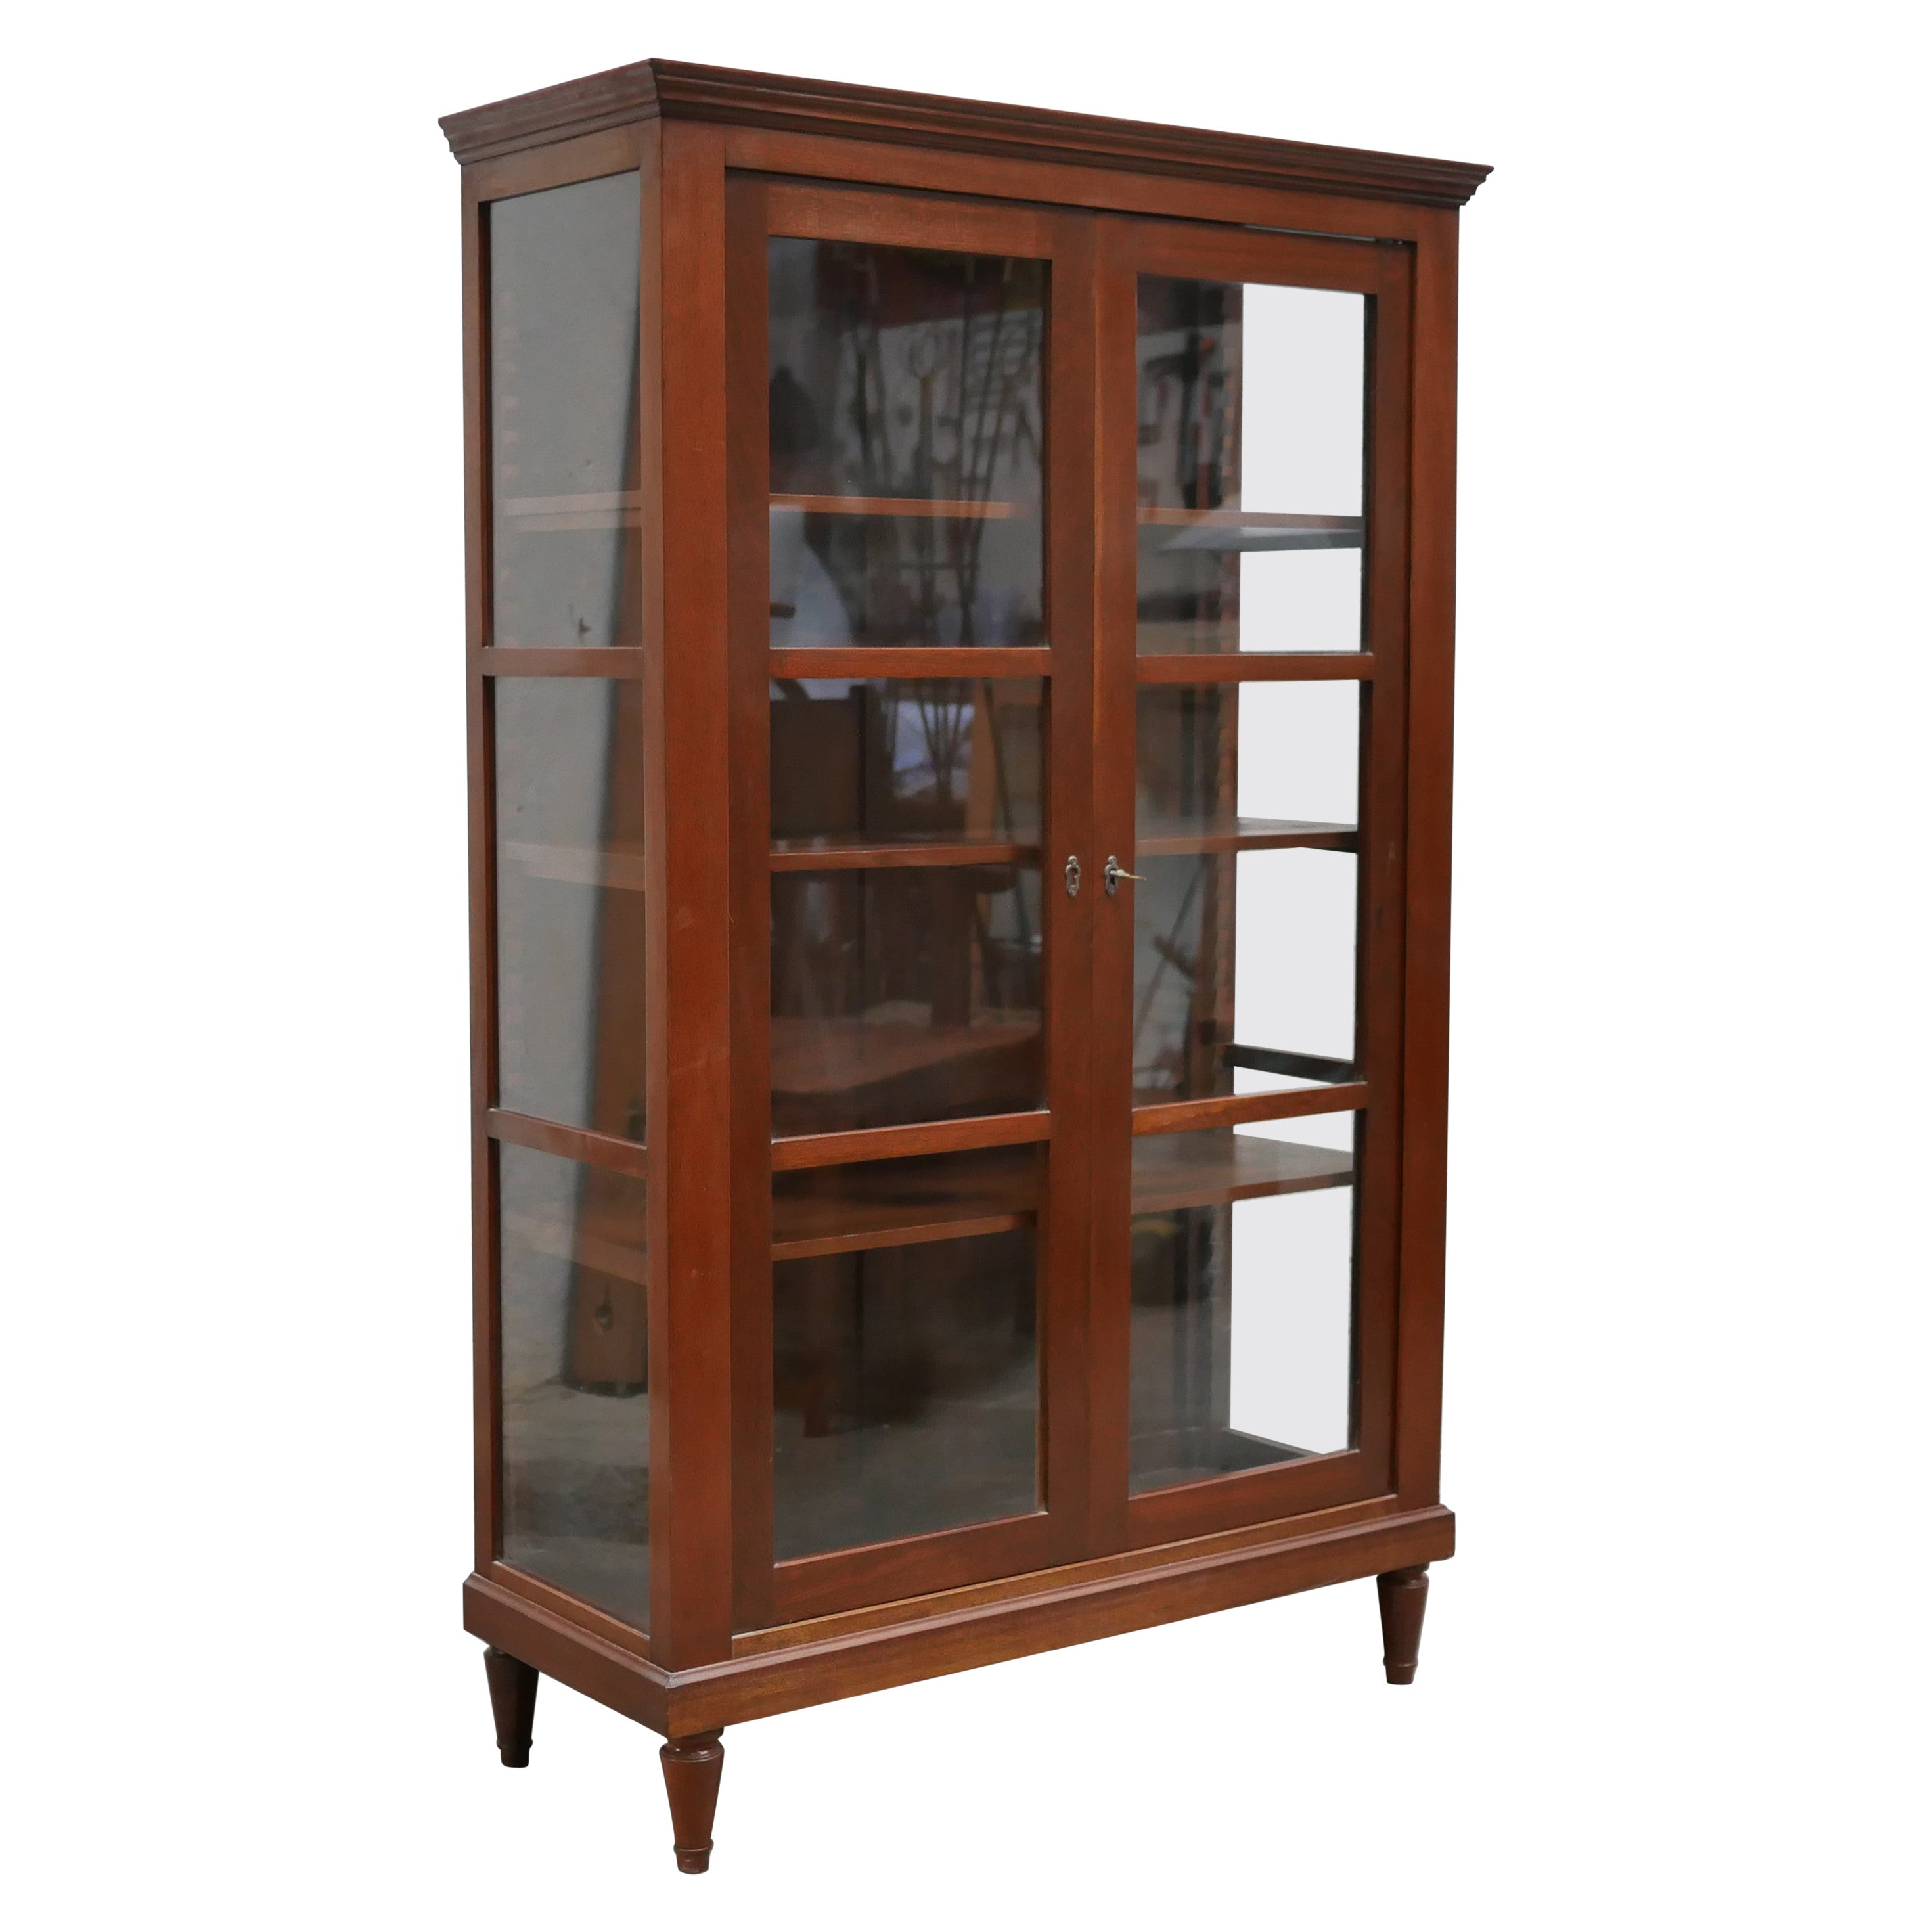 Old Wooden Showcase For Sale